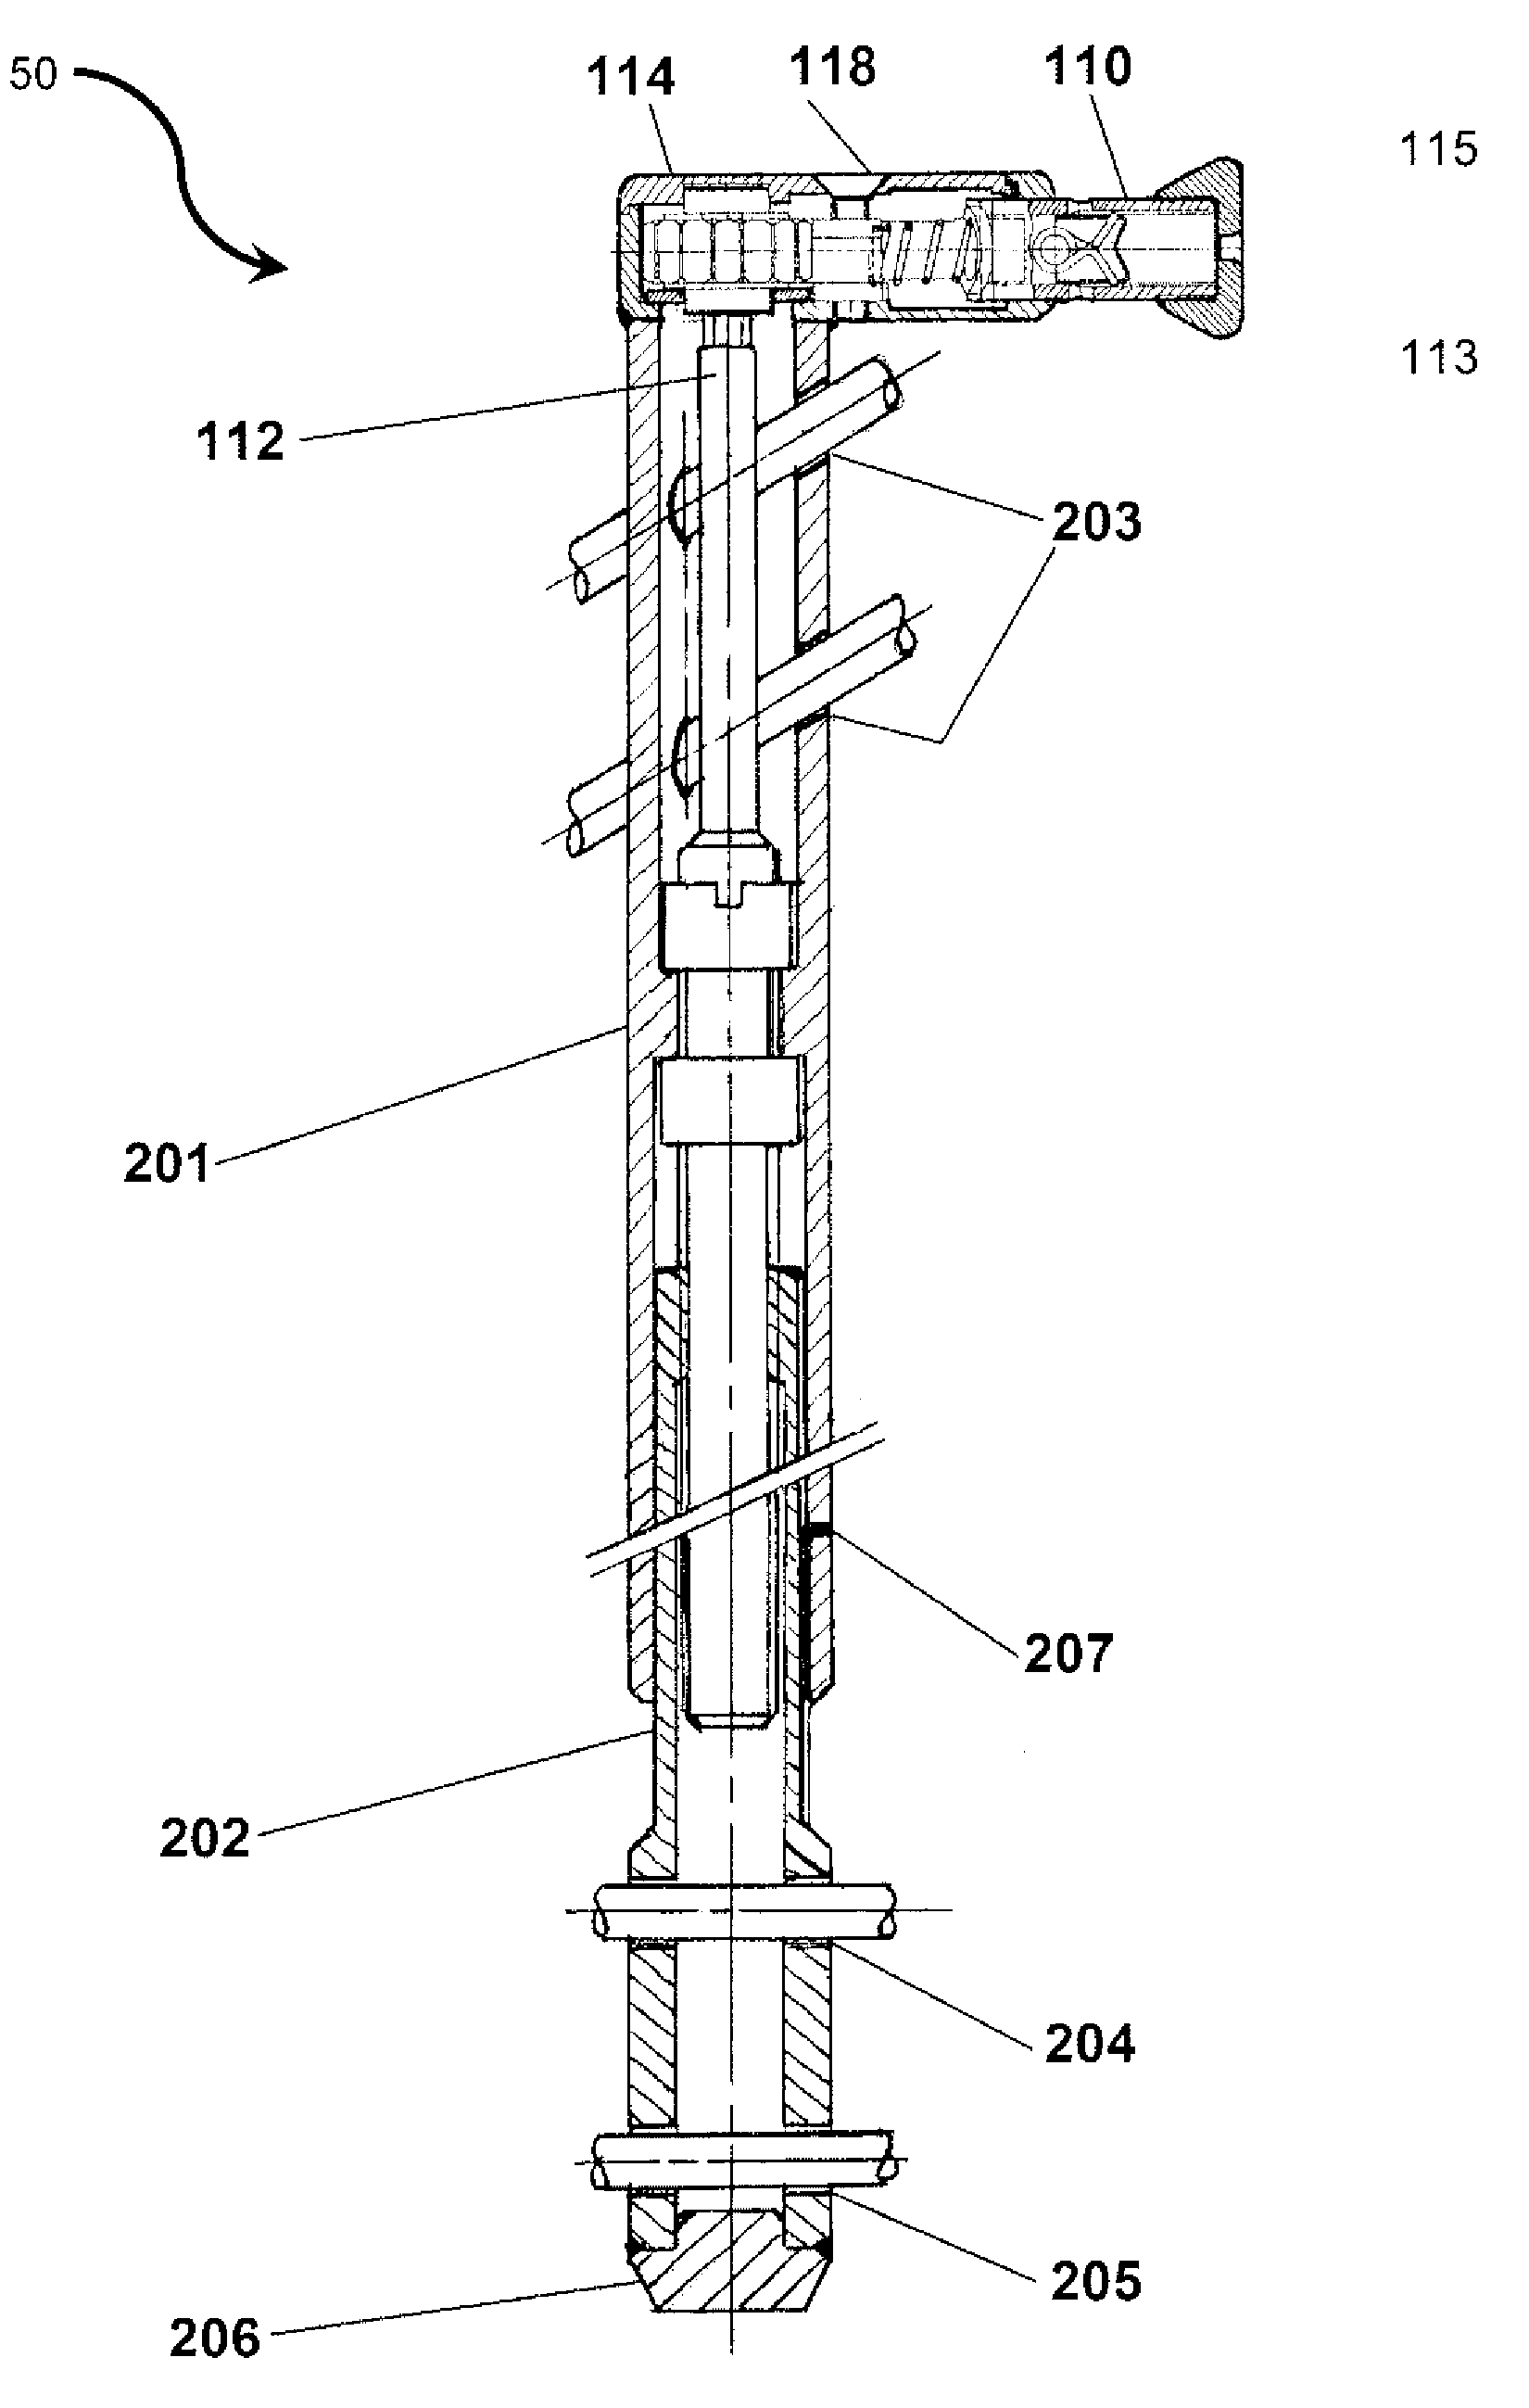 Intramedullar distraction device with user actuated distraction